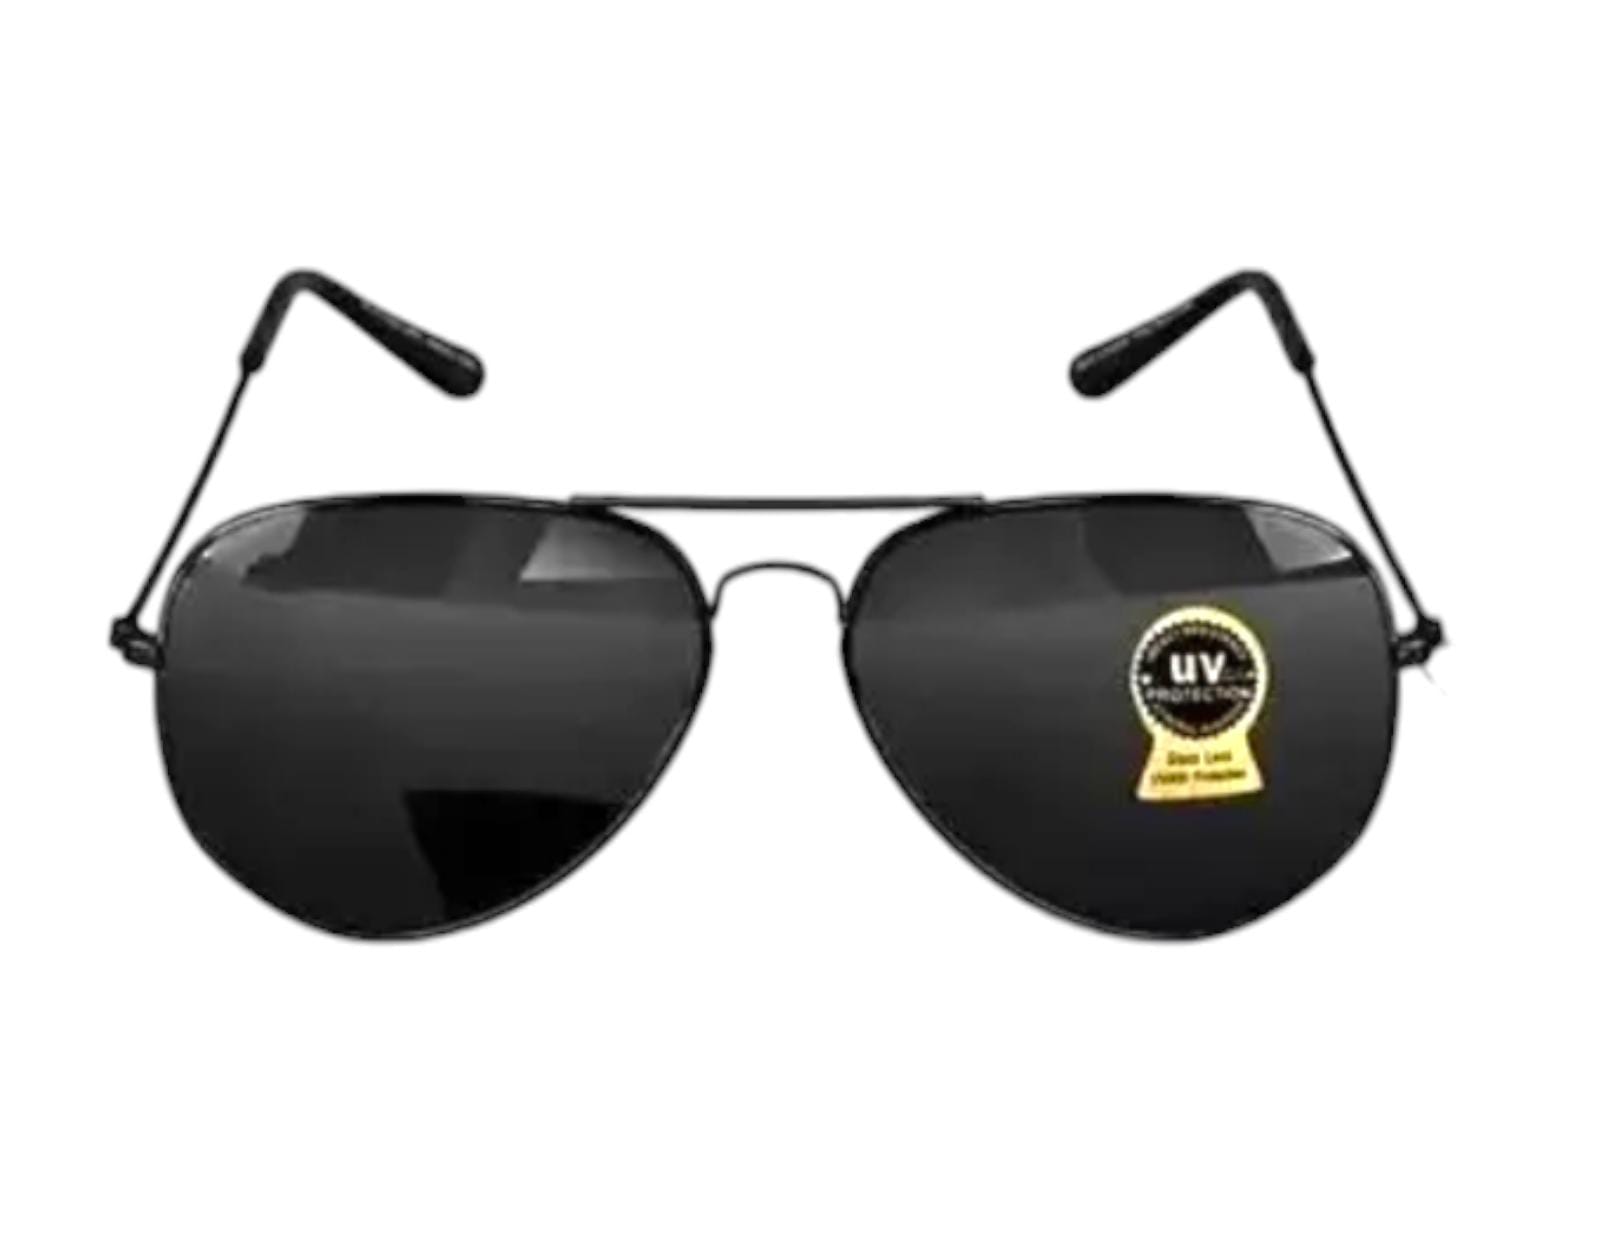 COOL LOOK DABANG STYLE AVIATOR SUNGLASSES WITH UV PROTECTION